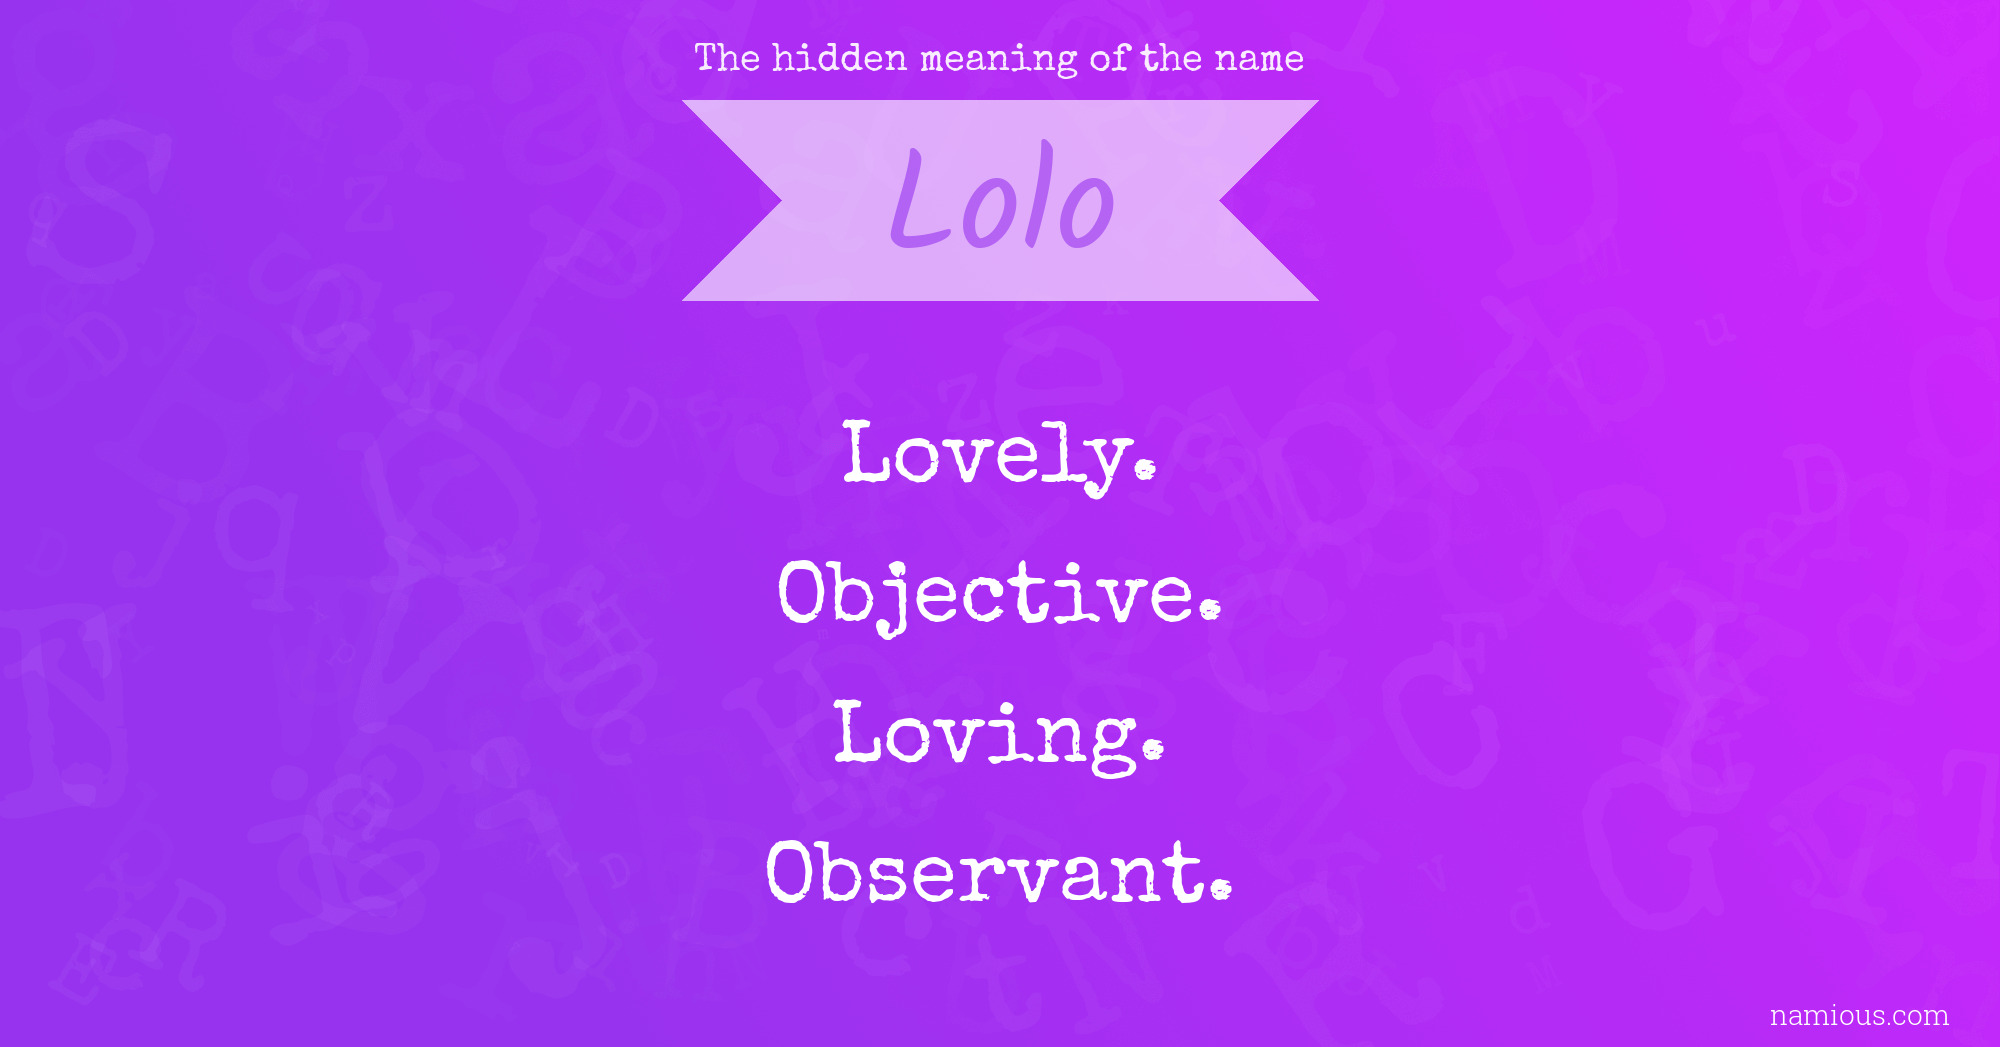 The hidden meaning of the name Lolo